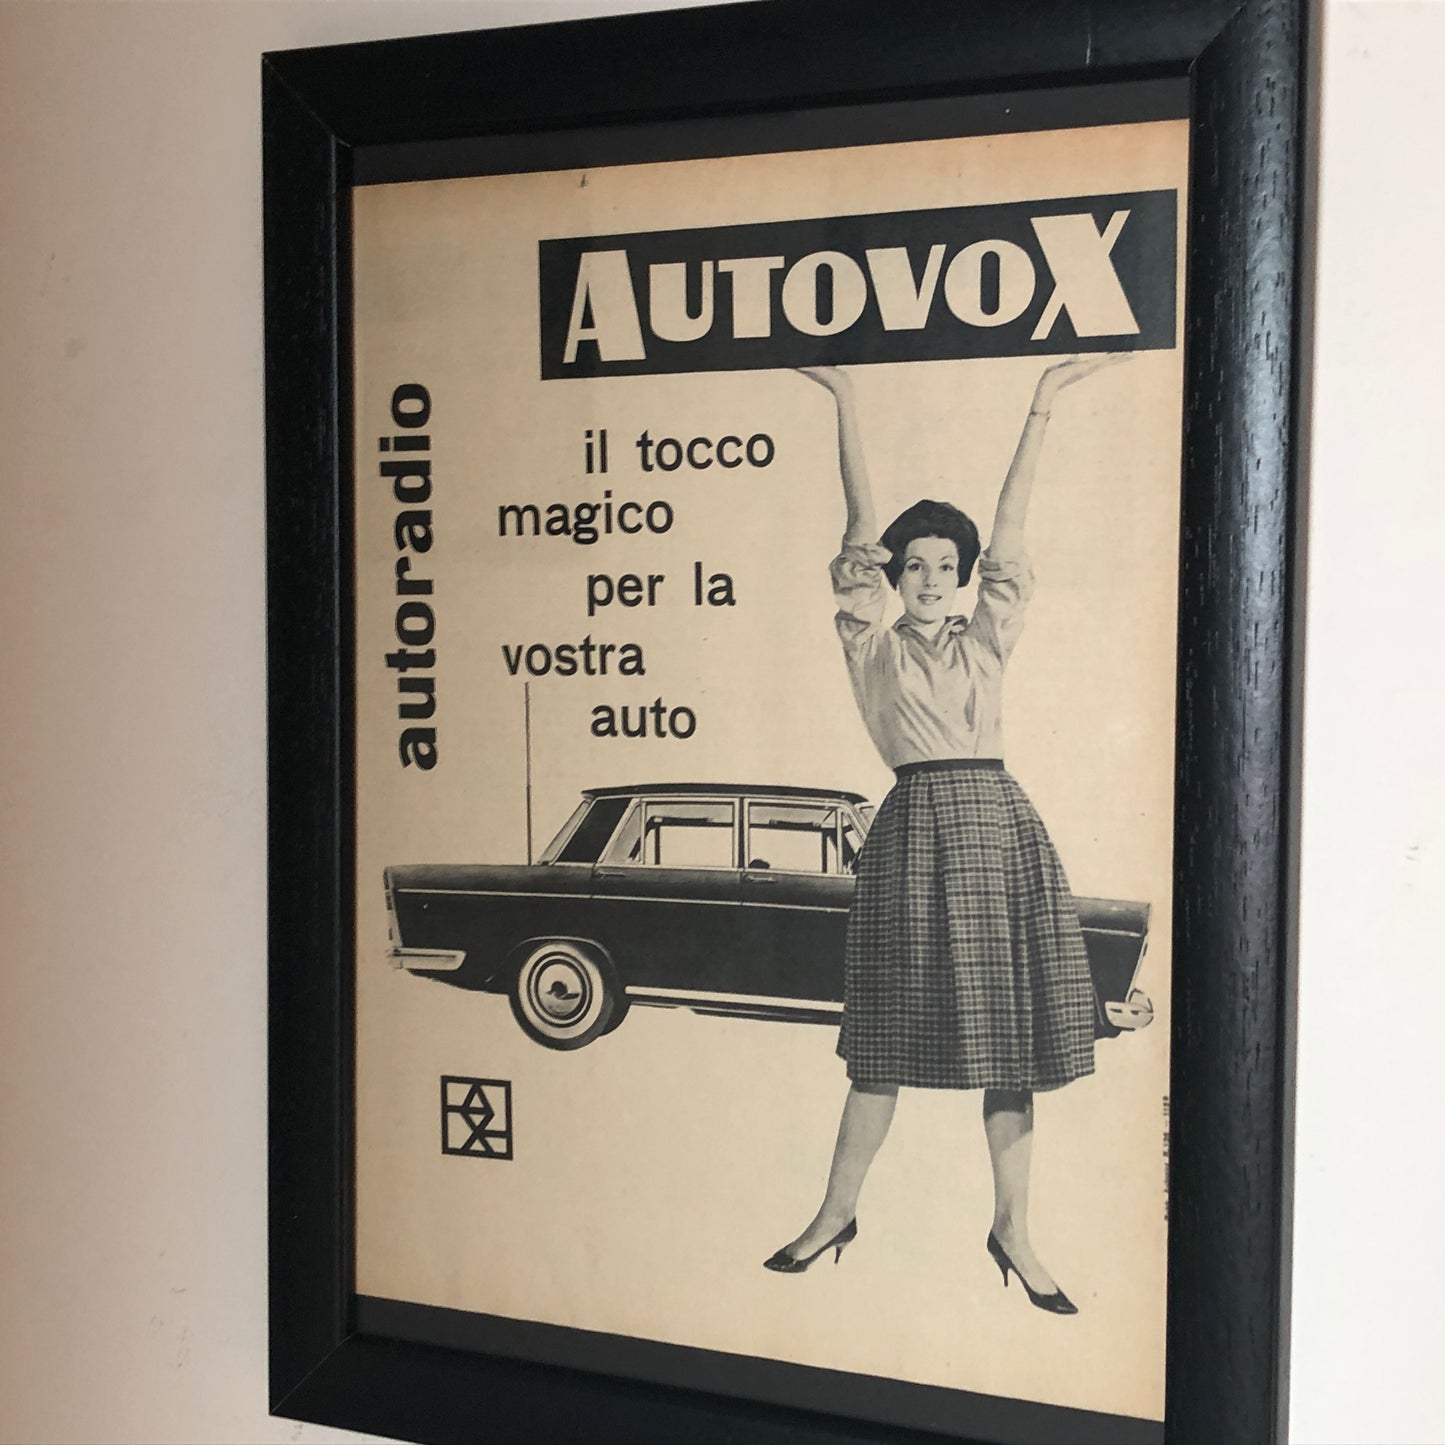 Autovox, Advertising Year 1960 Autovox Car Radio the Magic Touch for Your Car